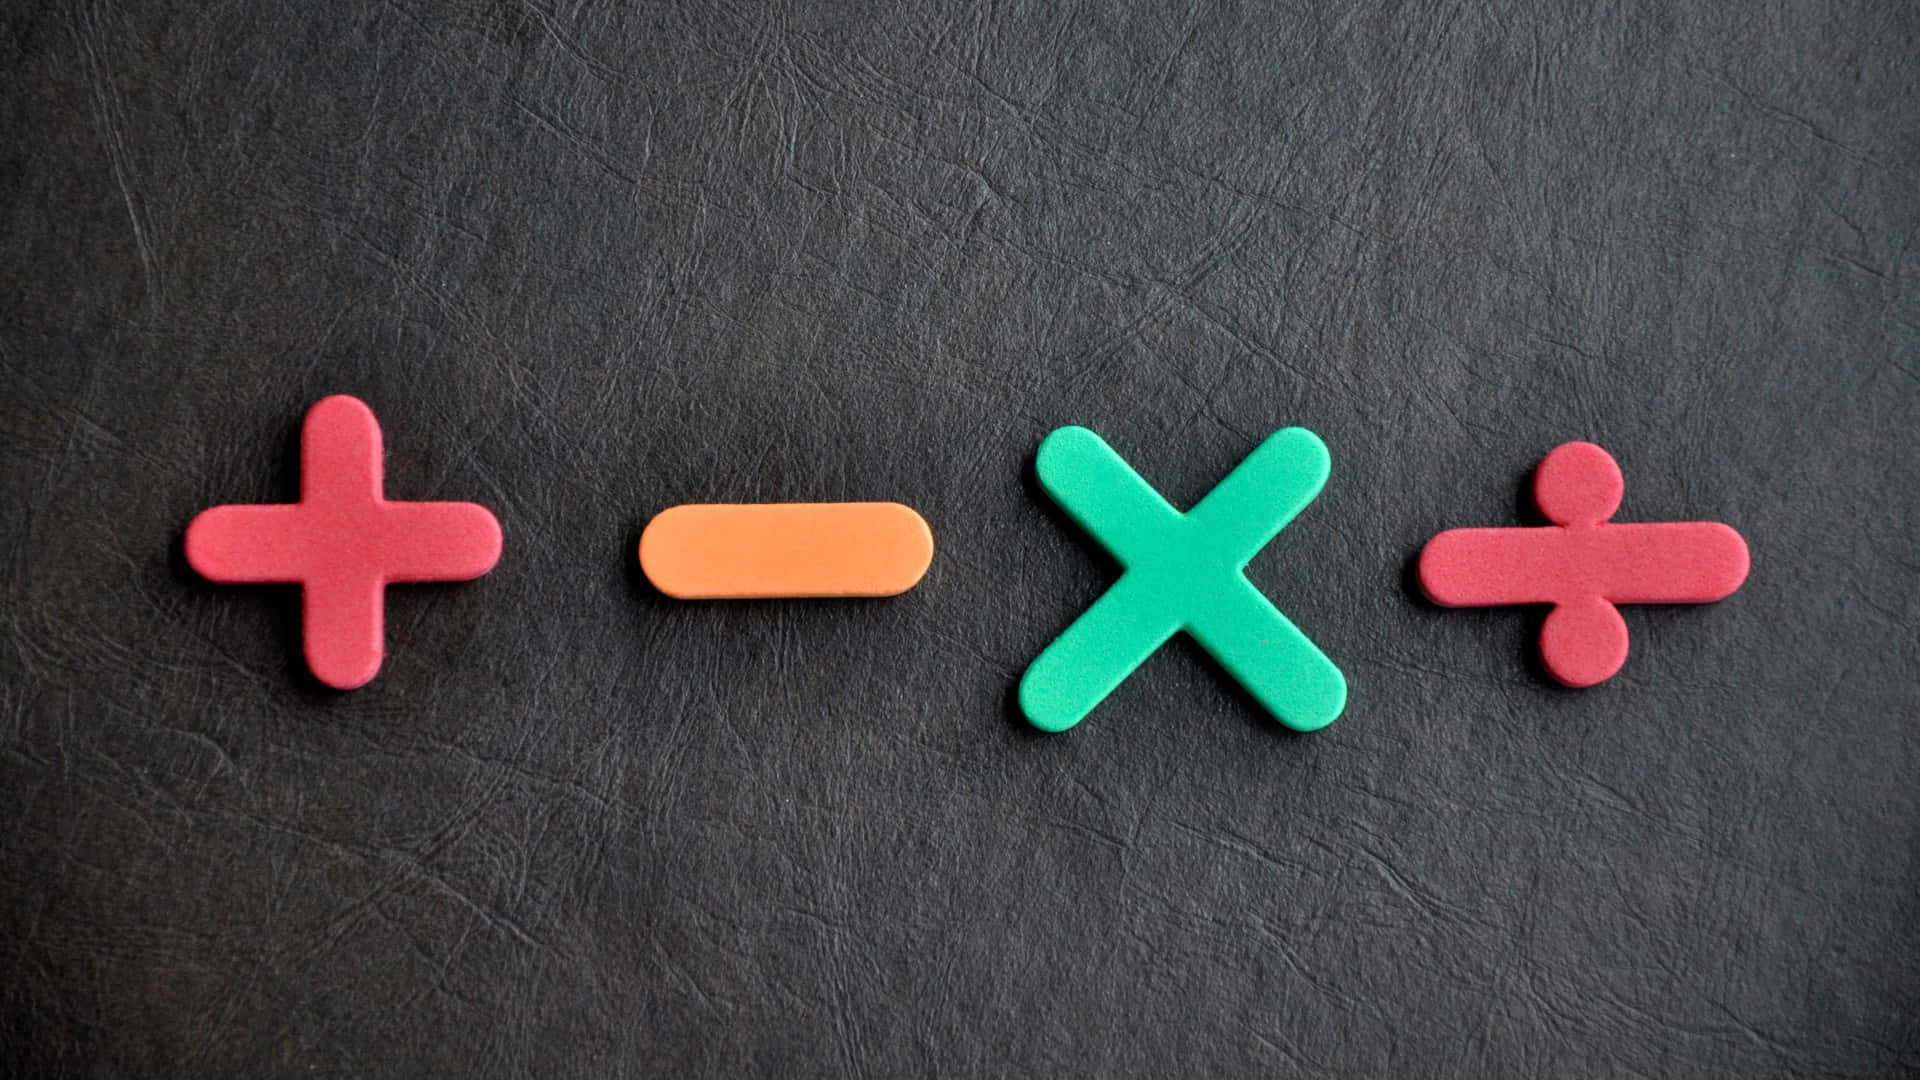 A Set Of Colorful Plastic Numbers On A Black Background